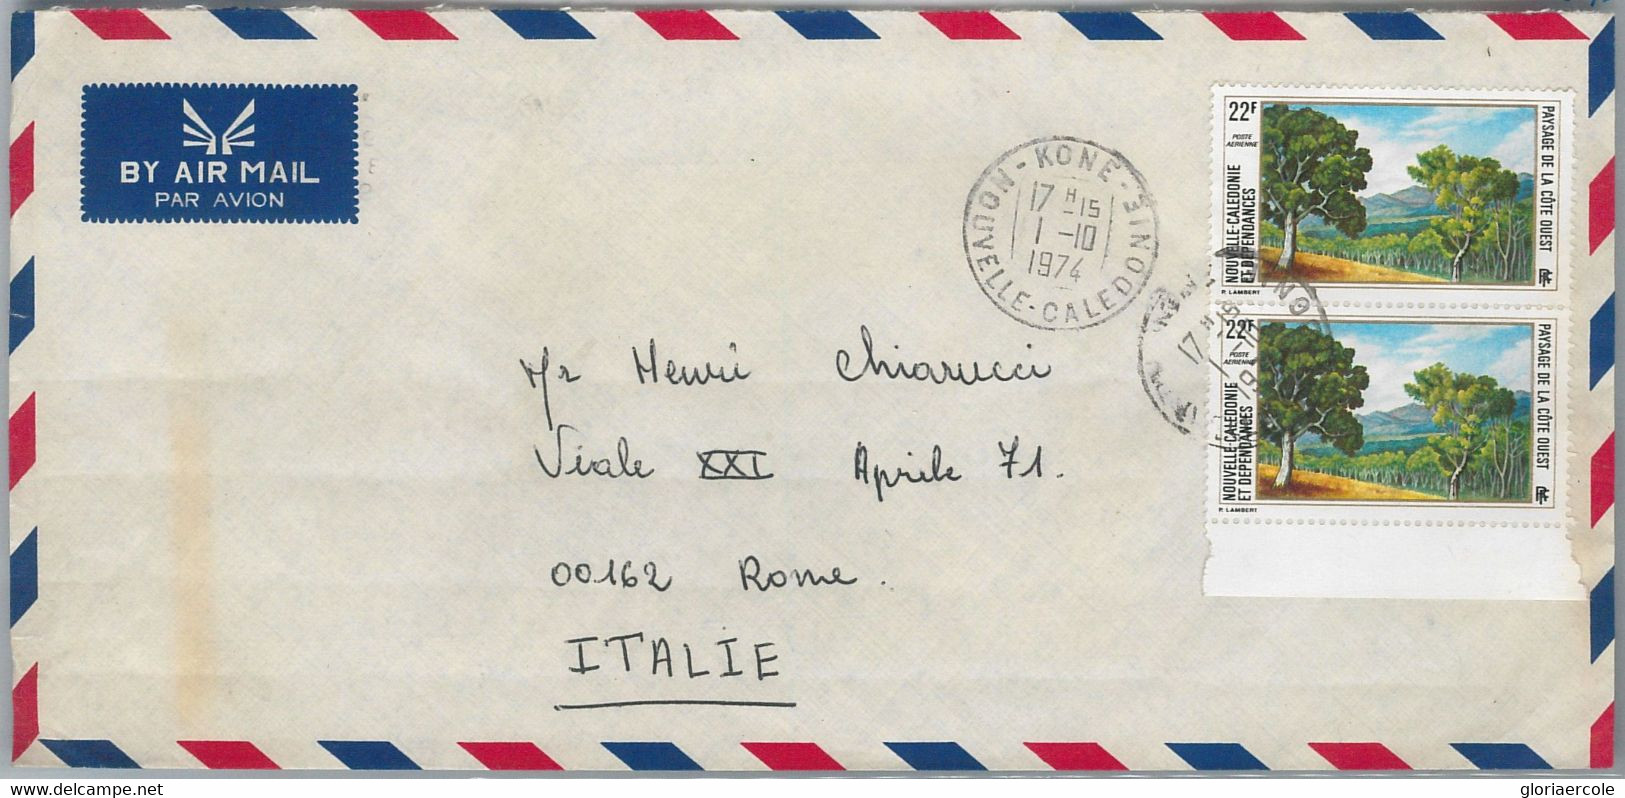 57369 - NOUVELLE CALEDONIE - POSTAL HISTORY - Airmail Cover To ITALY  1974 - Storia Postale